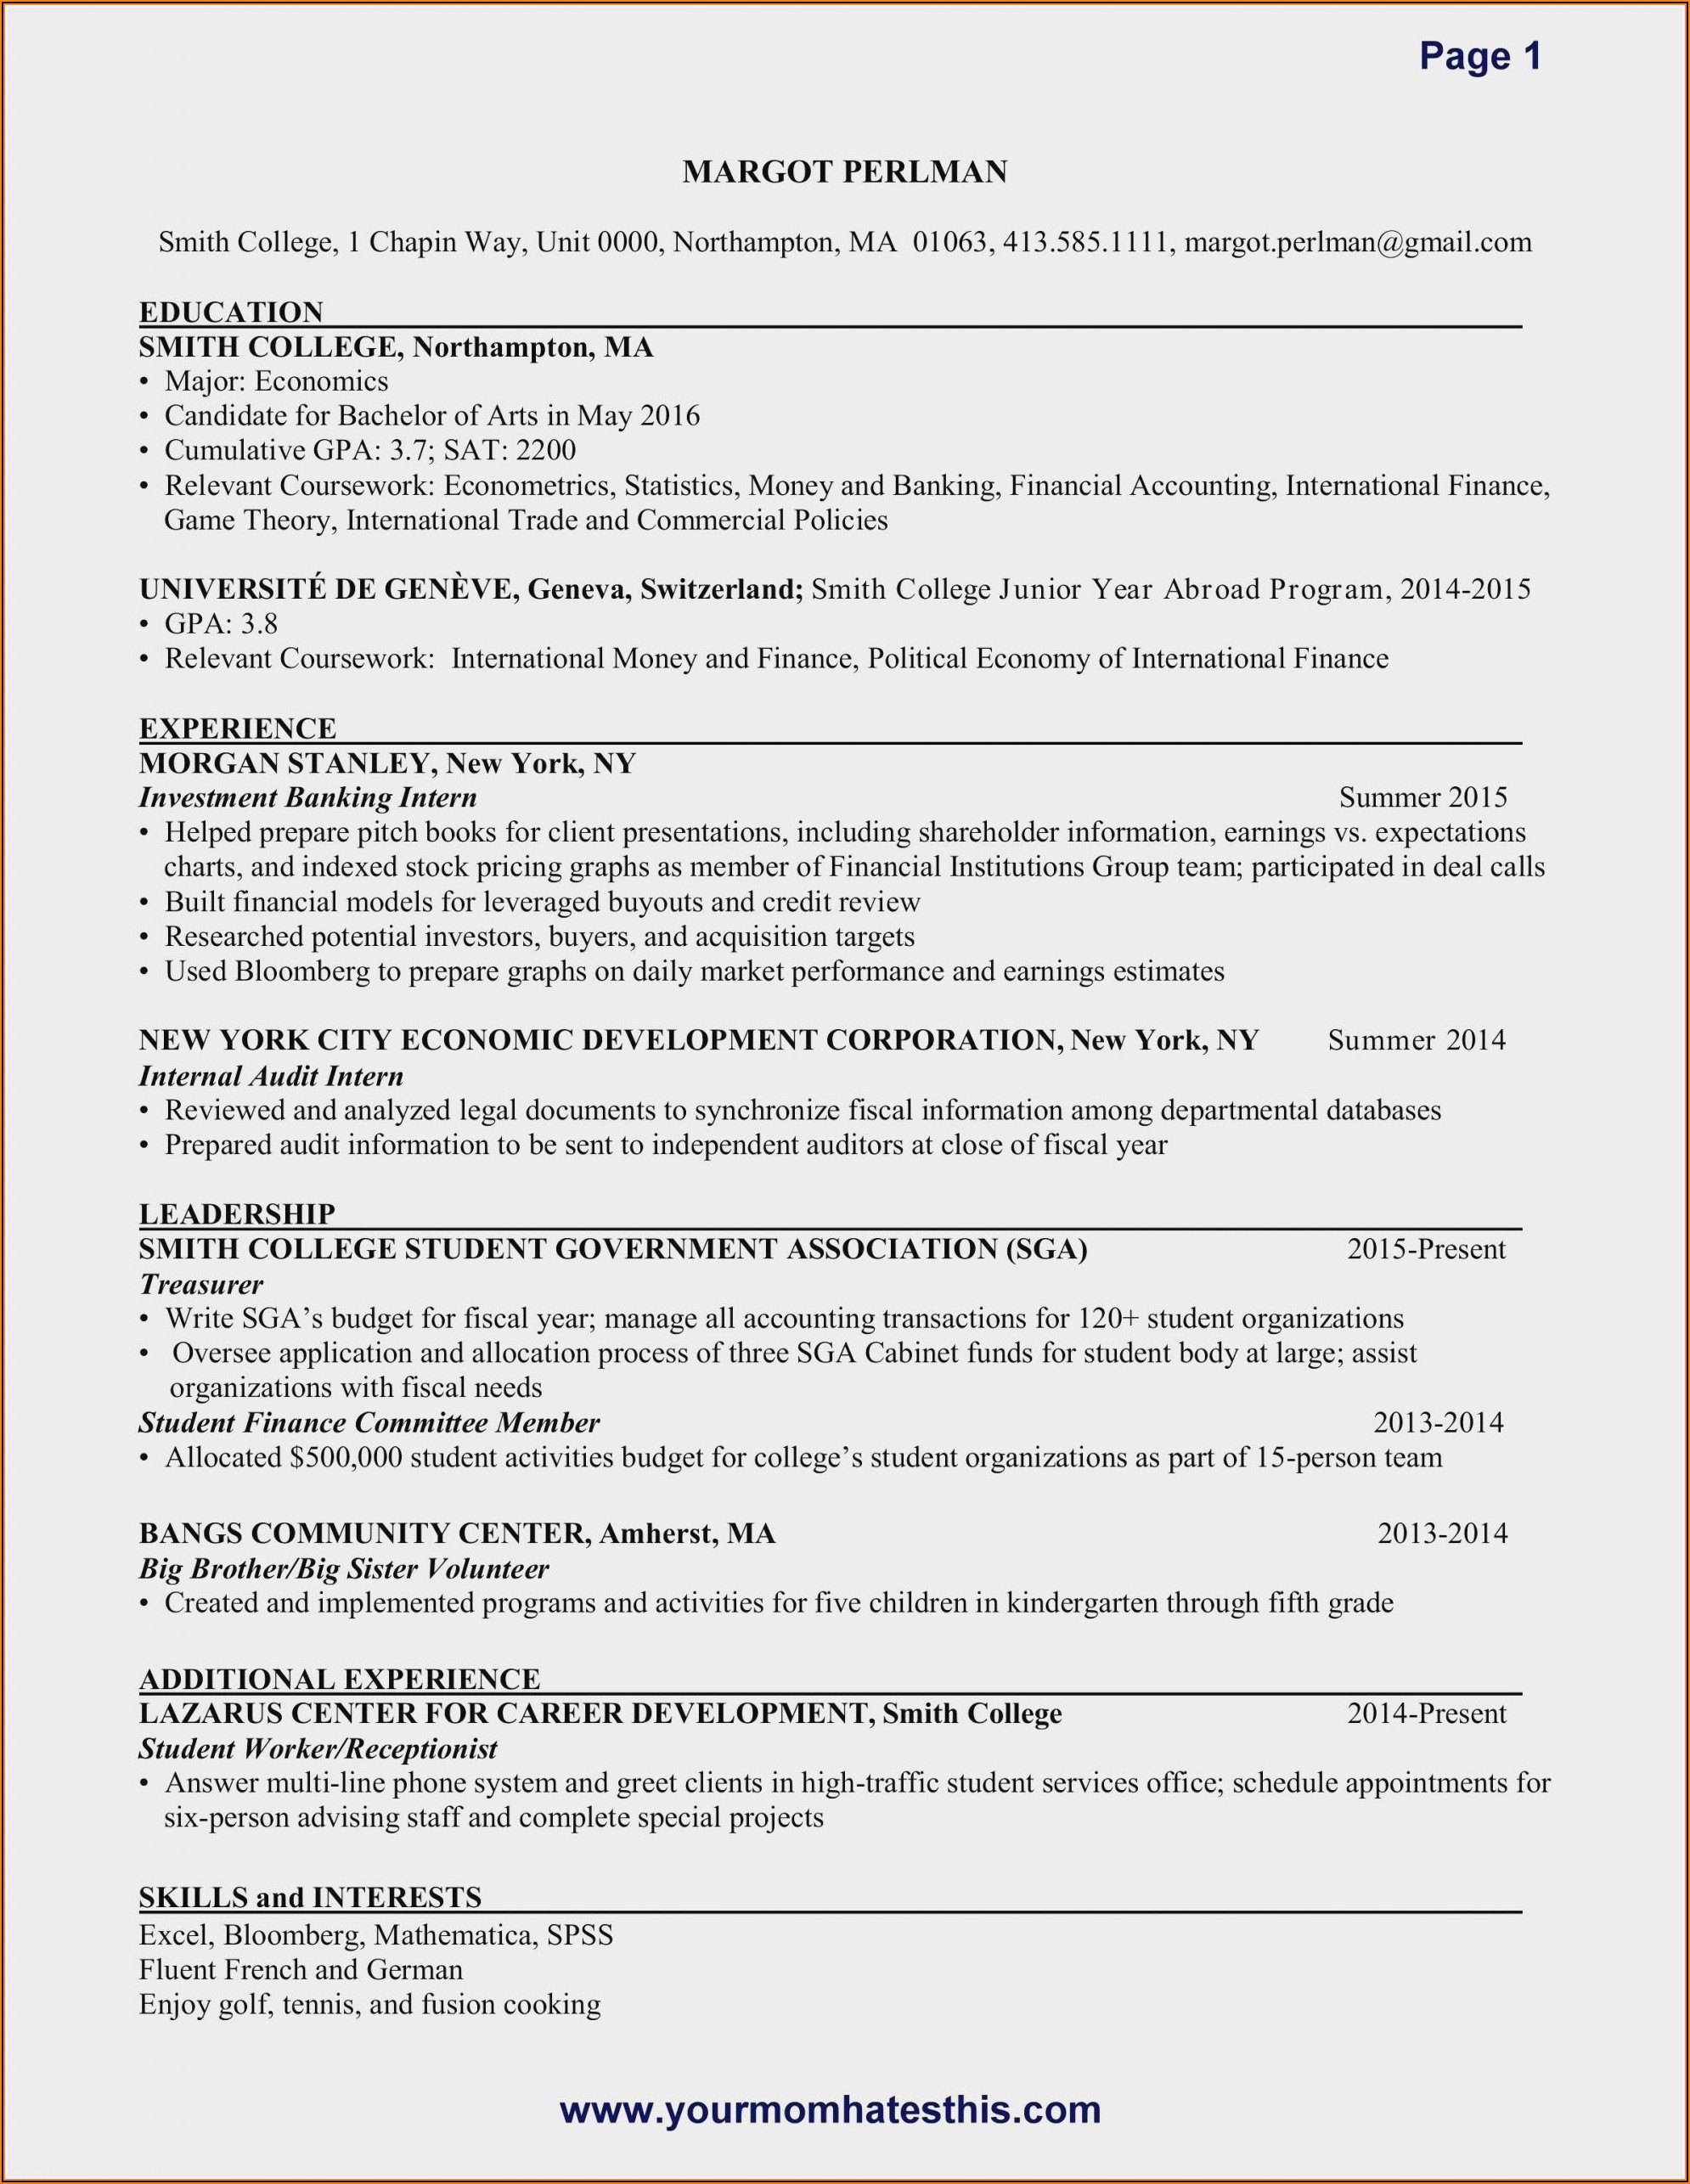 Resume Examples For Nurses Assistant